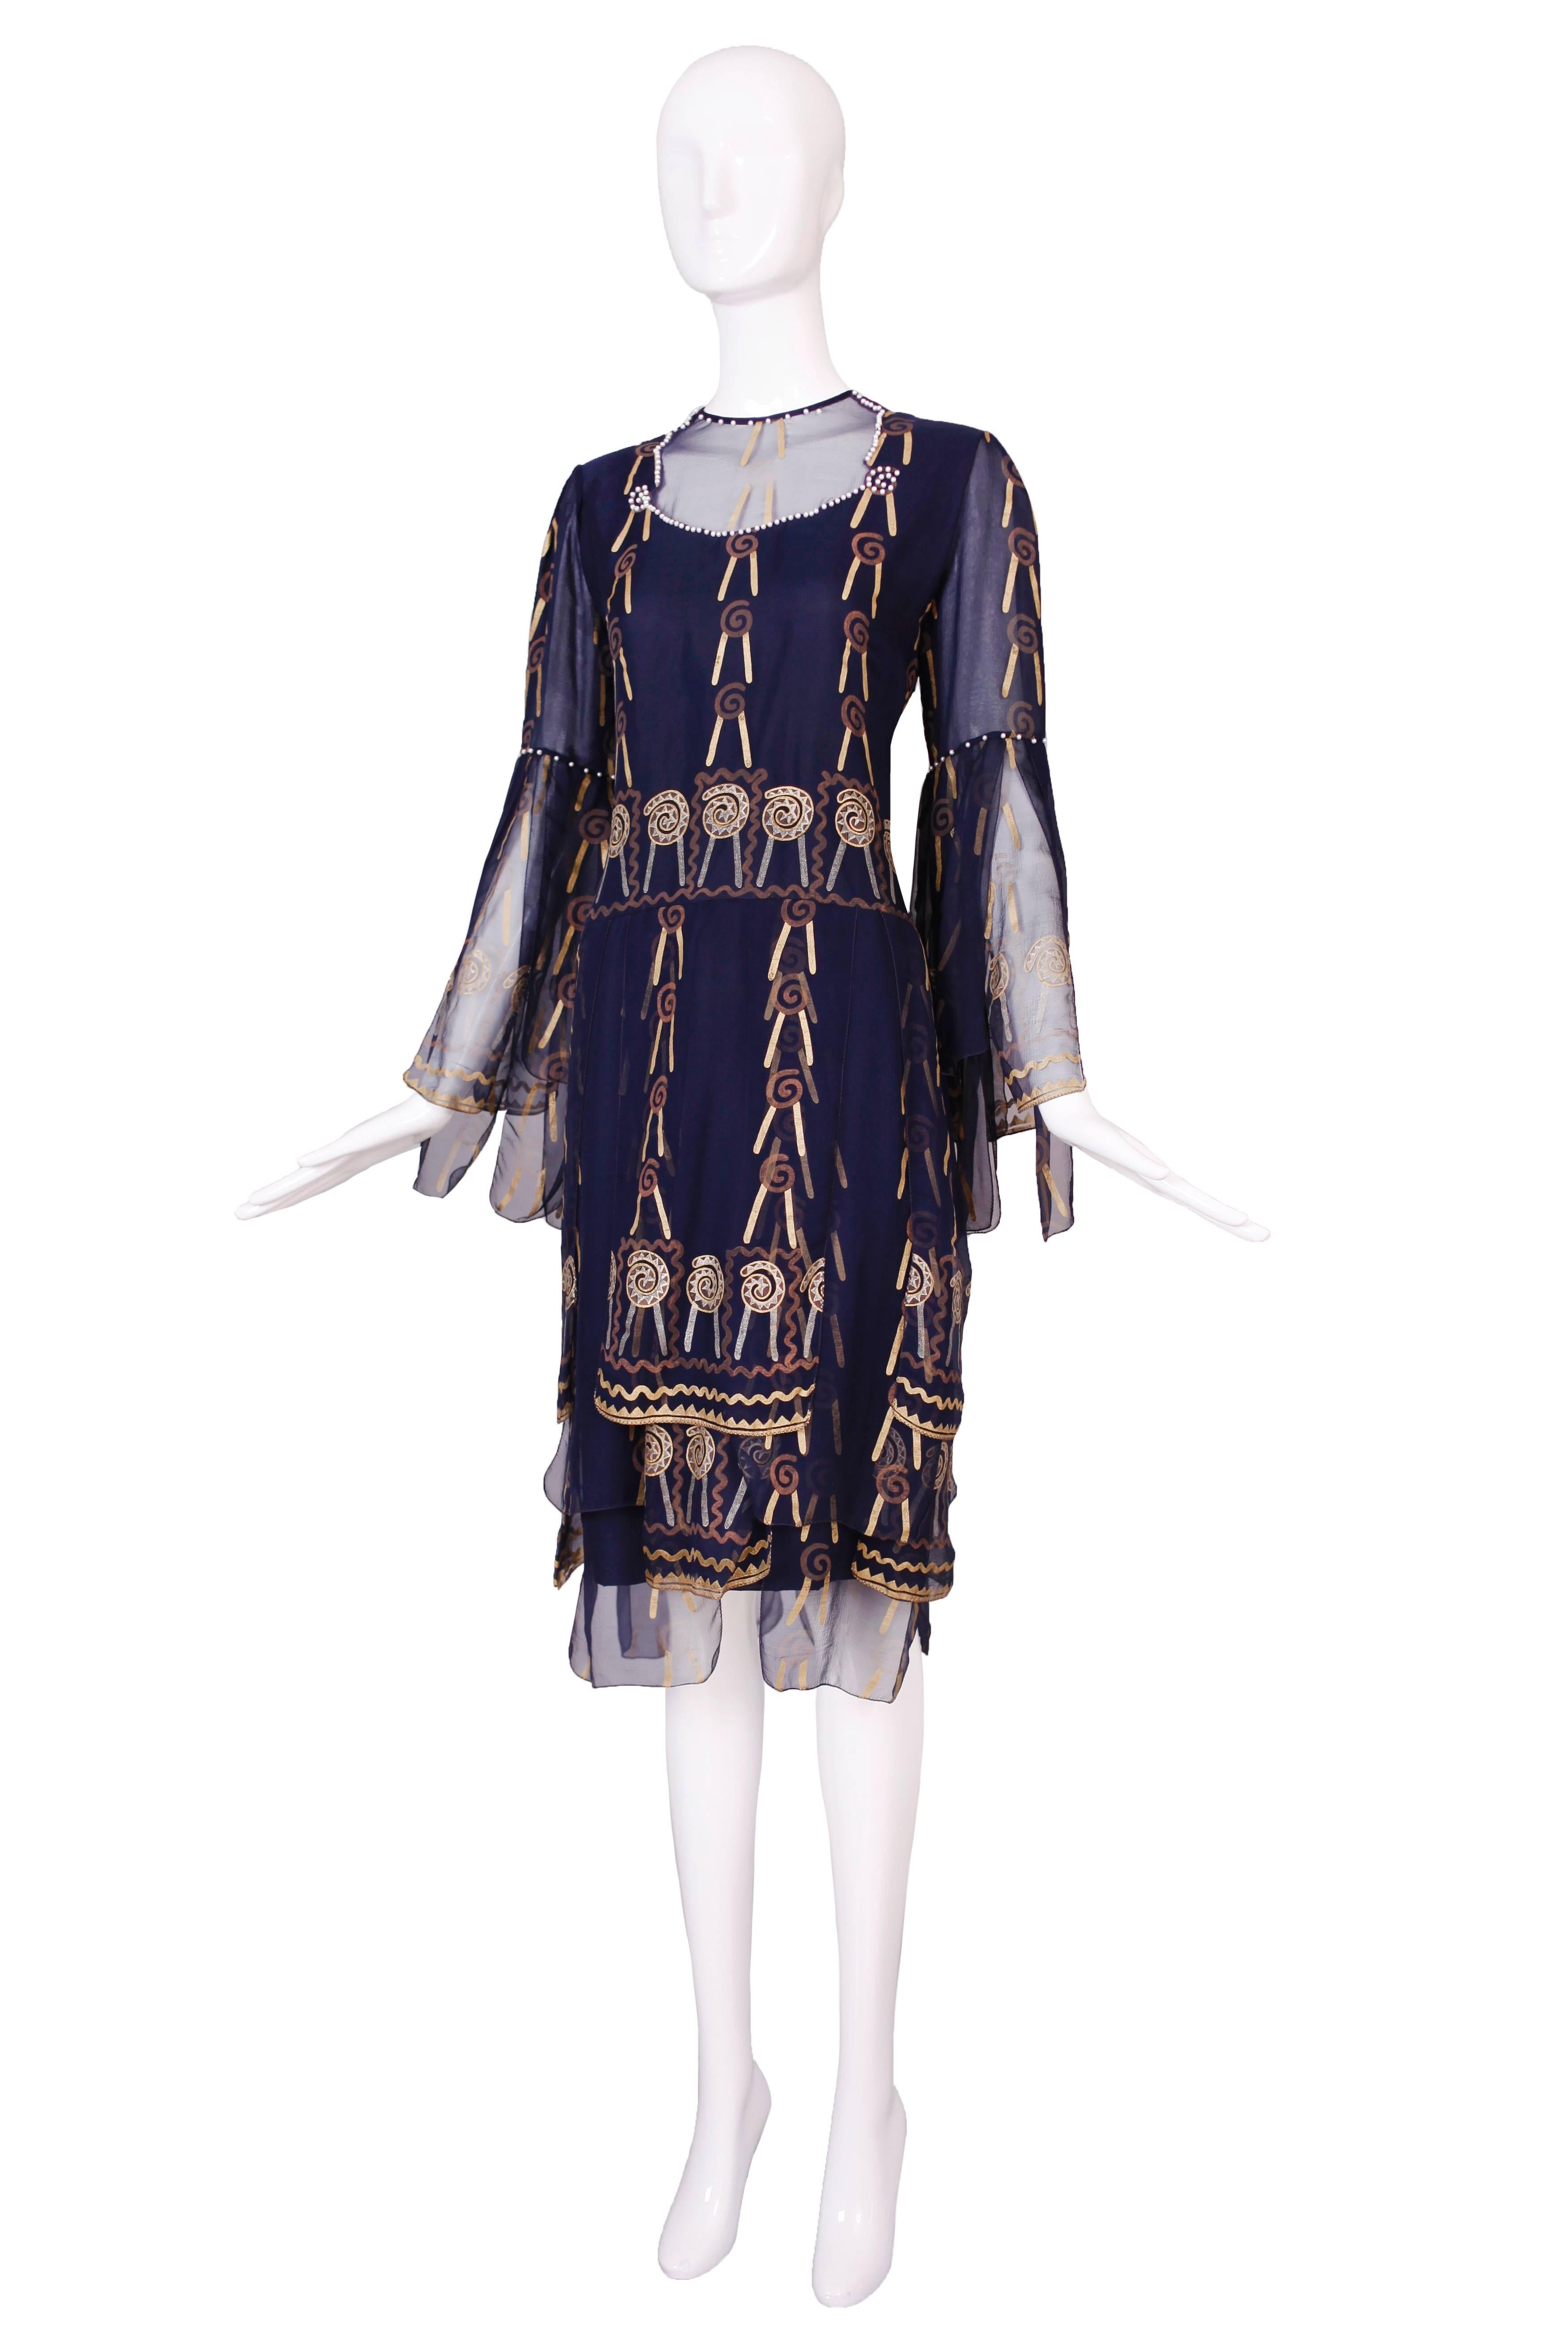 Zandra Rhodes navy blue hand-painted drop-waisted dress with decorative panels and embroidered pearls are the neckline and arms. In excellent condition. Size tag 8. See measurements.
MEASUREMENTS:
Bust - 38